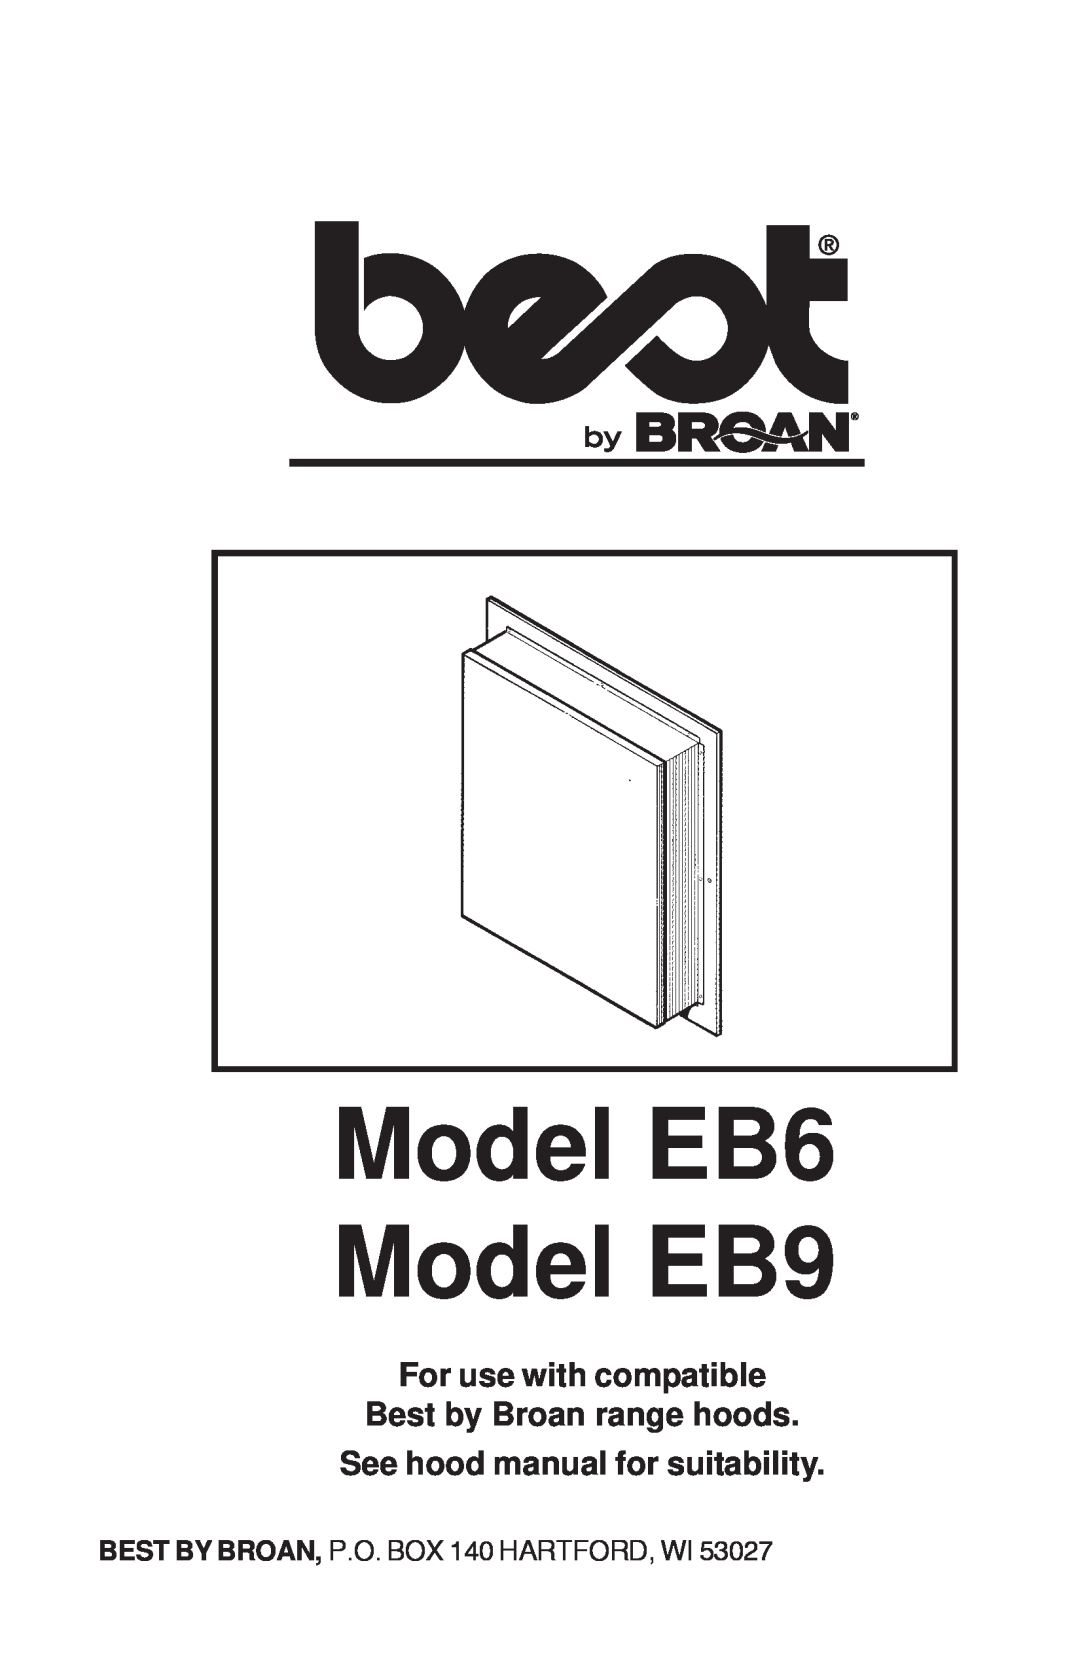 Best manual Model EB6 Model EB9, For use with compatible Best by Broan range hoods, See hood manual for suitability 